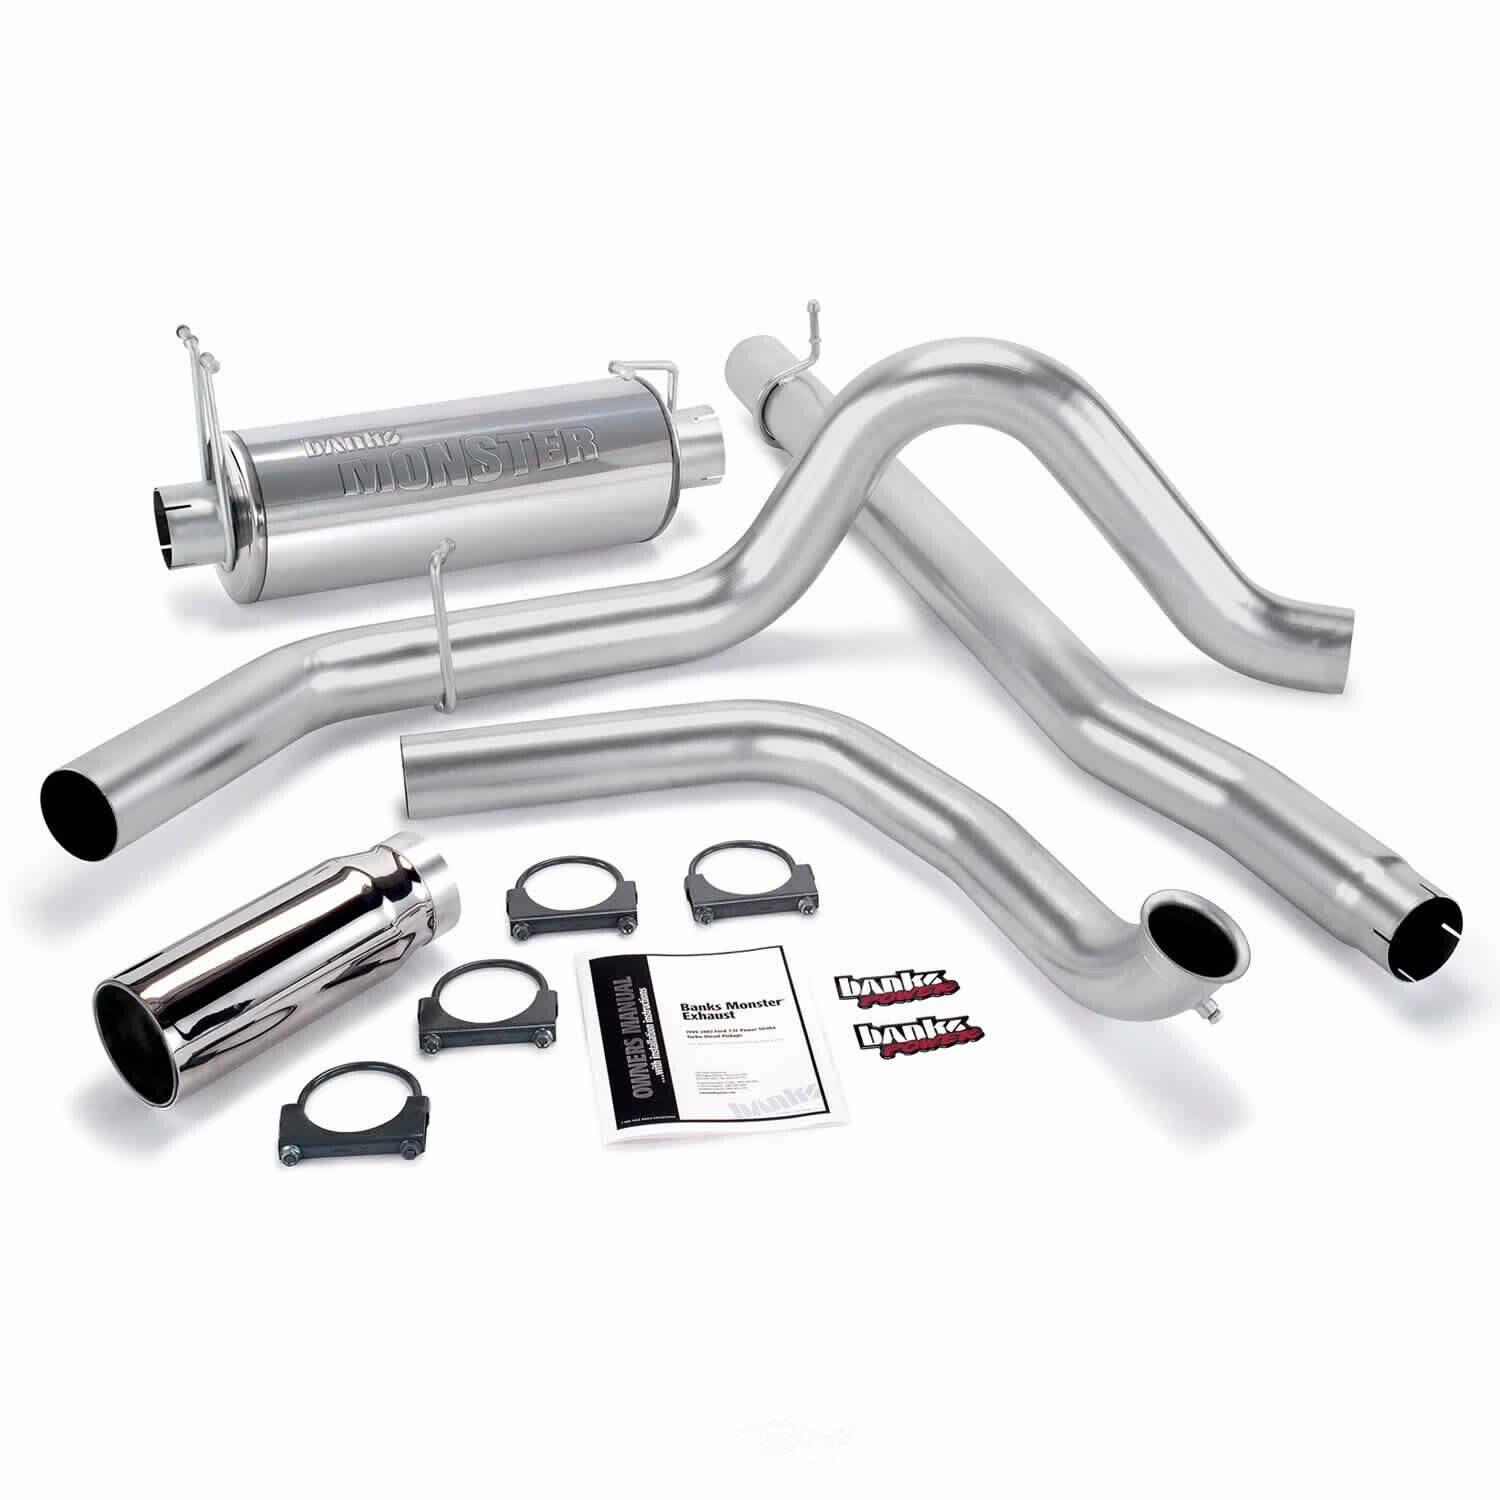 Exhaust System Kit BANKS POWER 48653 fits 2000 Ford Excursion